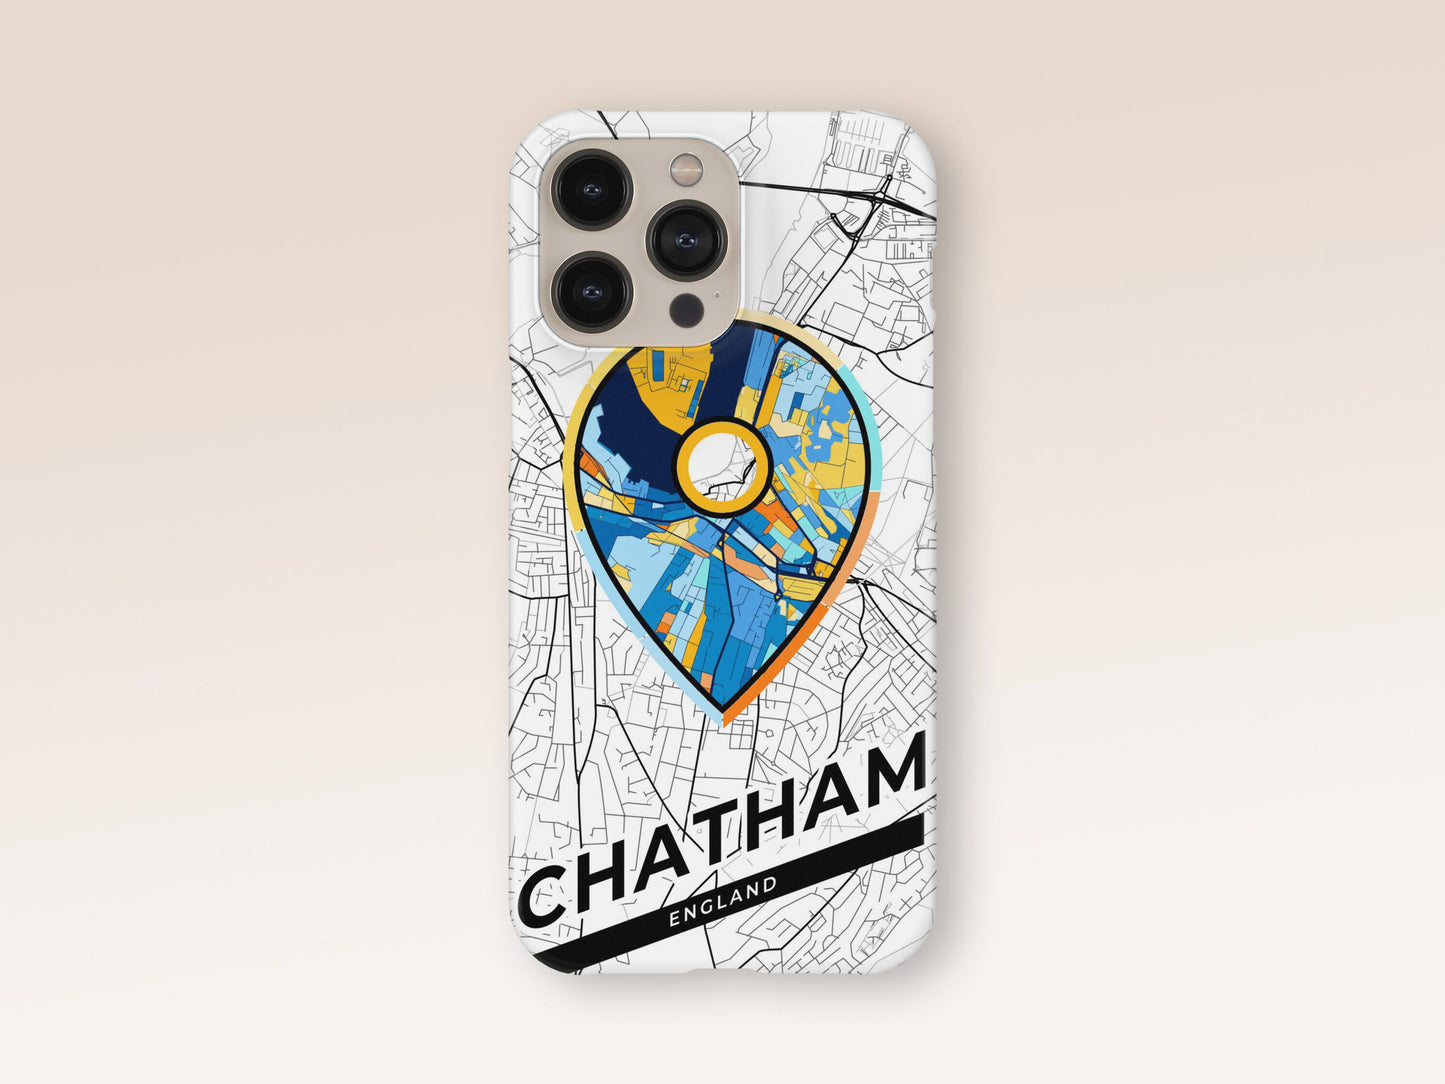 Chatham England slim phone case with colorful icon. Birthday, wedding or housewarming gift. Couple match cases. 1